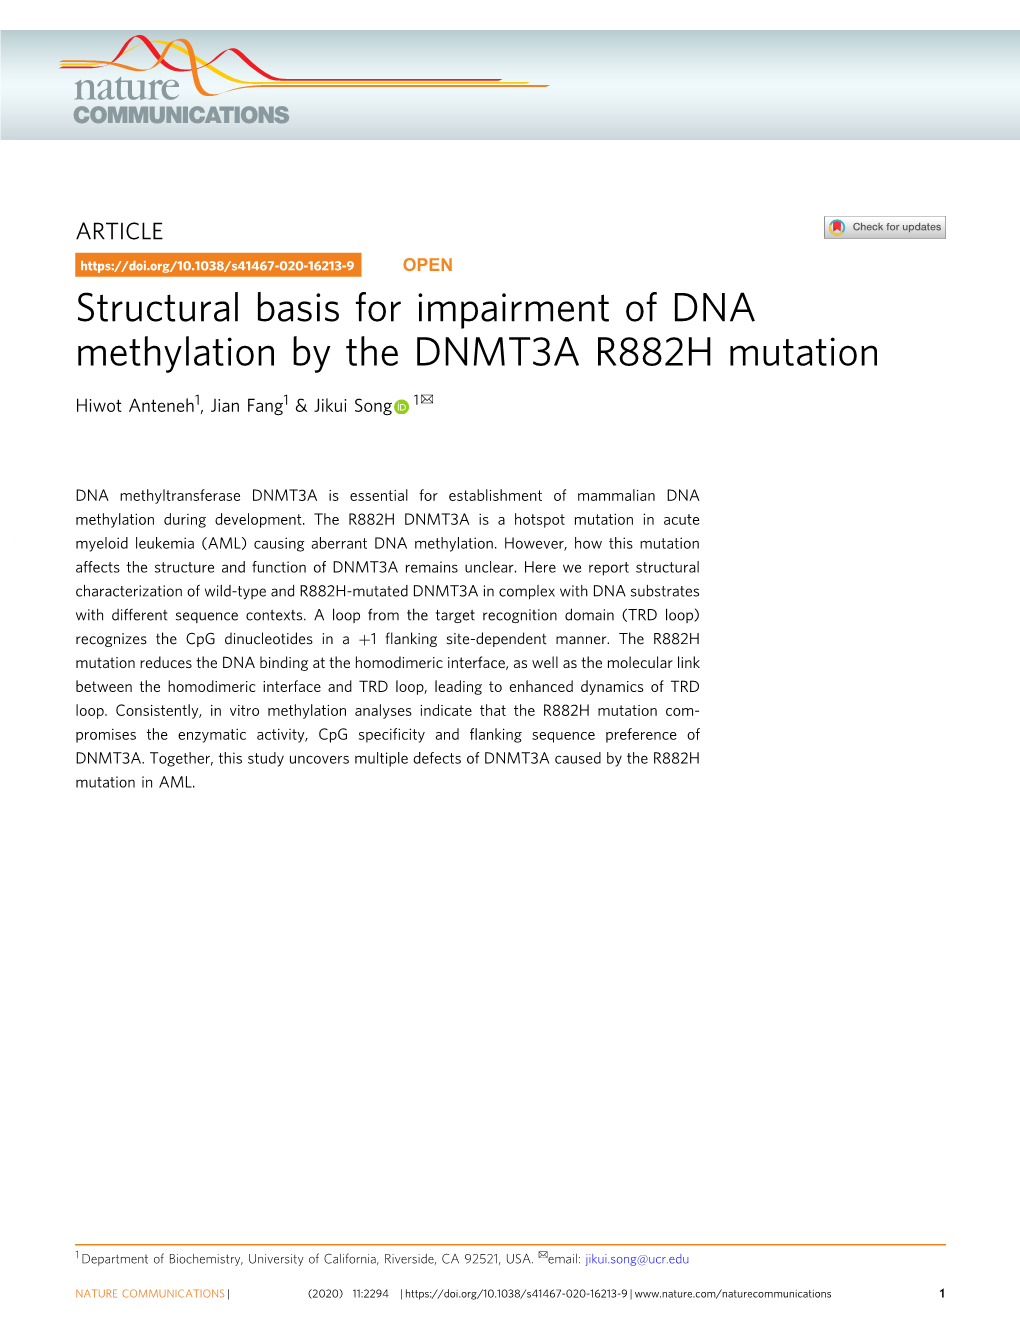 Structural Basis for Impairment of DNA Methylation by the DNMT3A R882H Mutation ✉ Hiwot Anteneh1, Jian Fang1 & Jikui Song 1